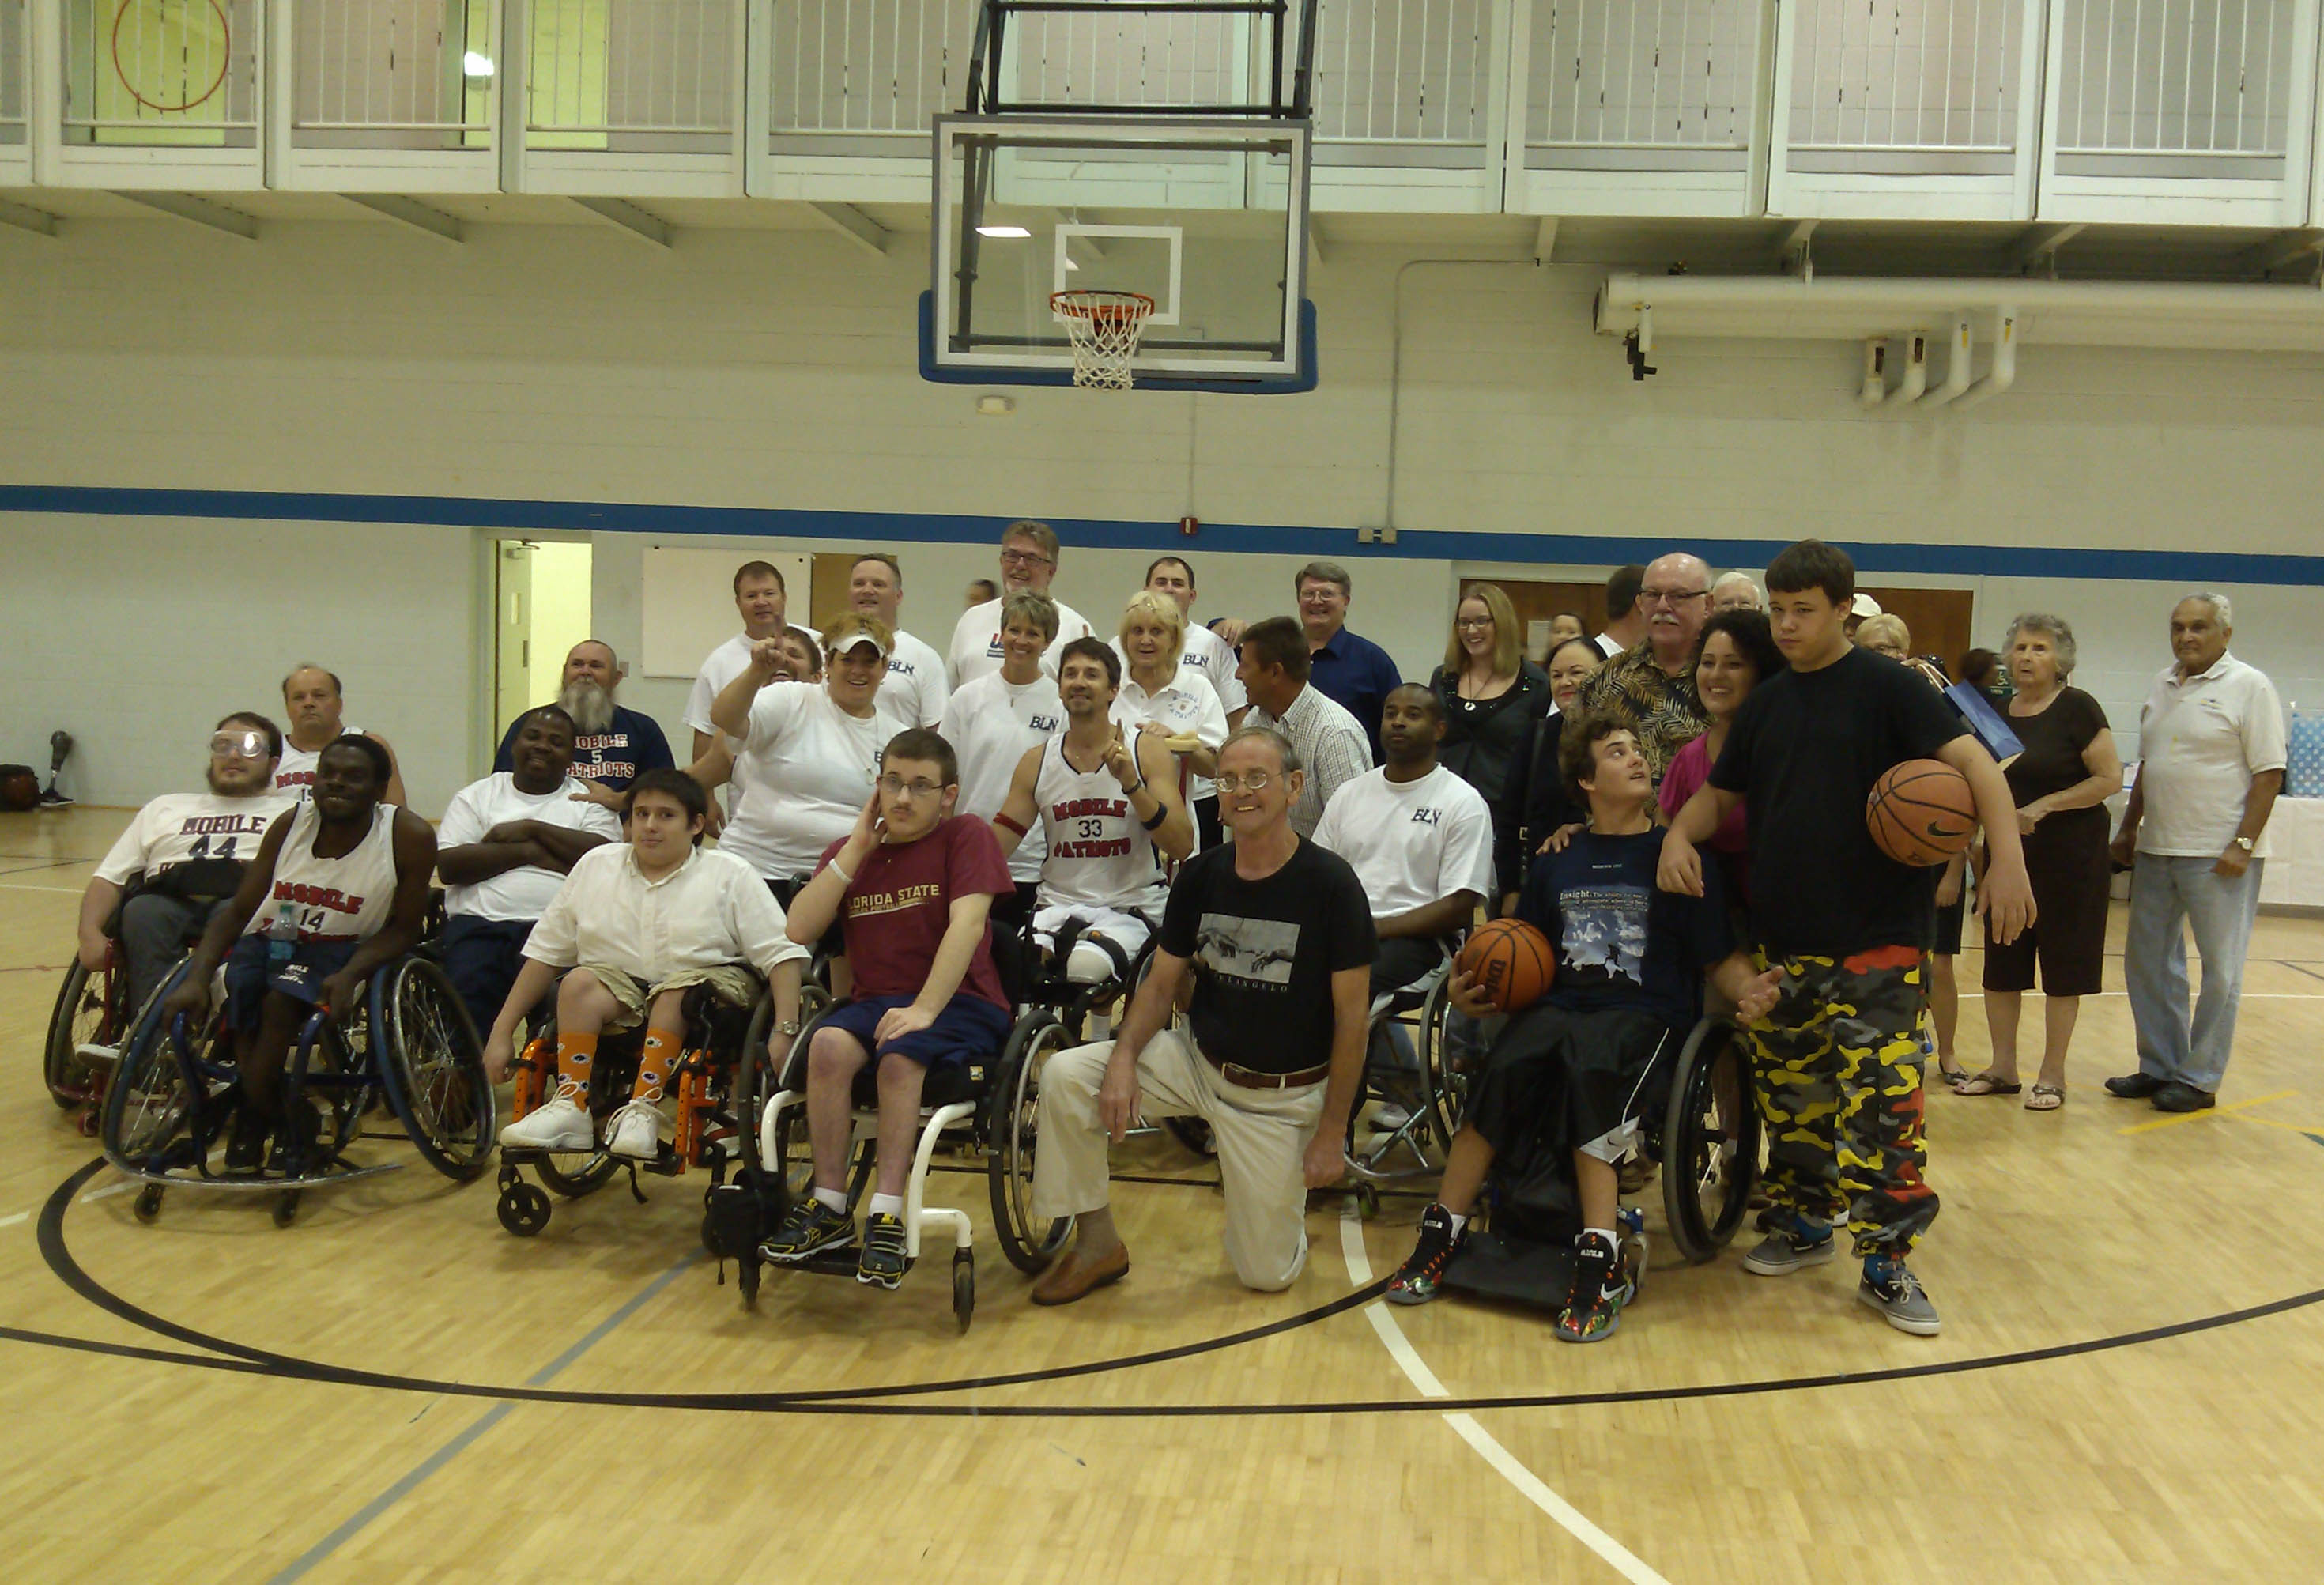 The Panhandle Business Leadership Network (BLN) hosted the Wheelchair Basketball Game featuring the Mobile Patriots and Pensacola Celebrities 